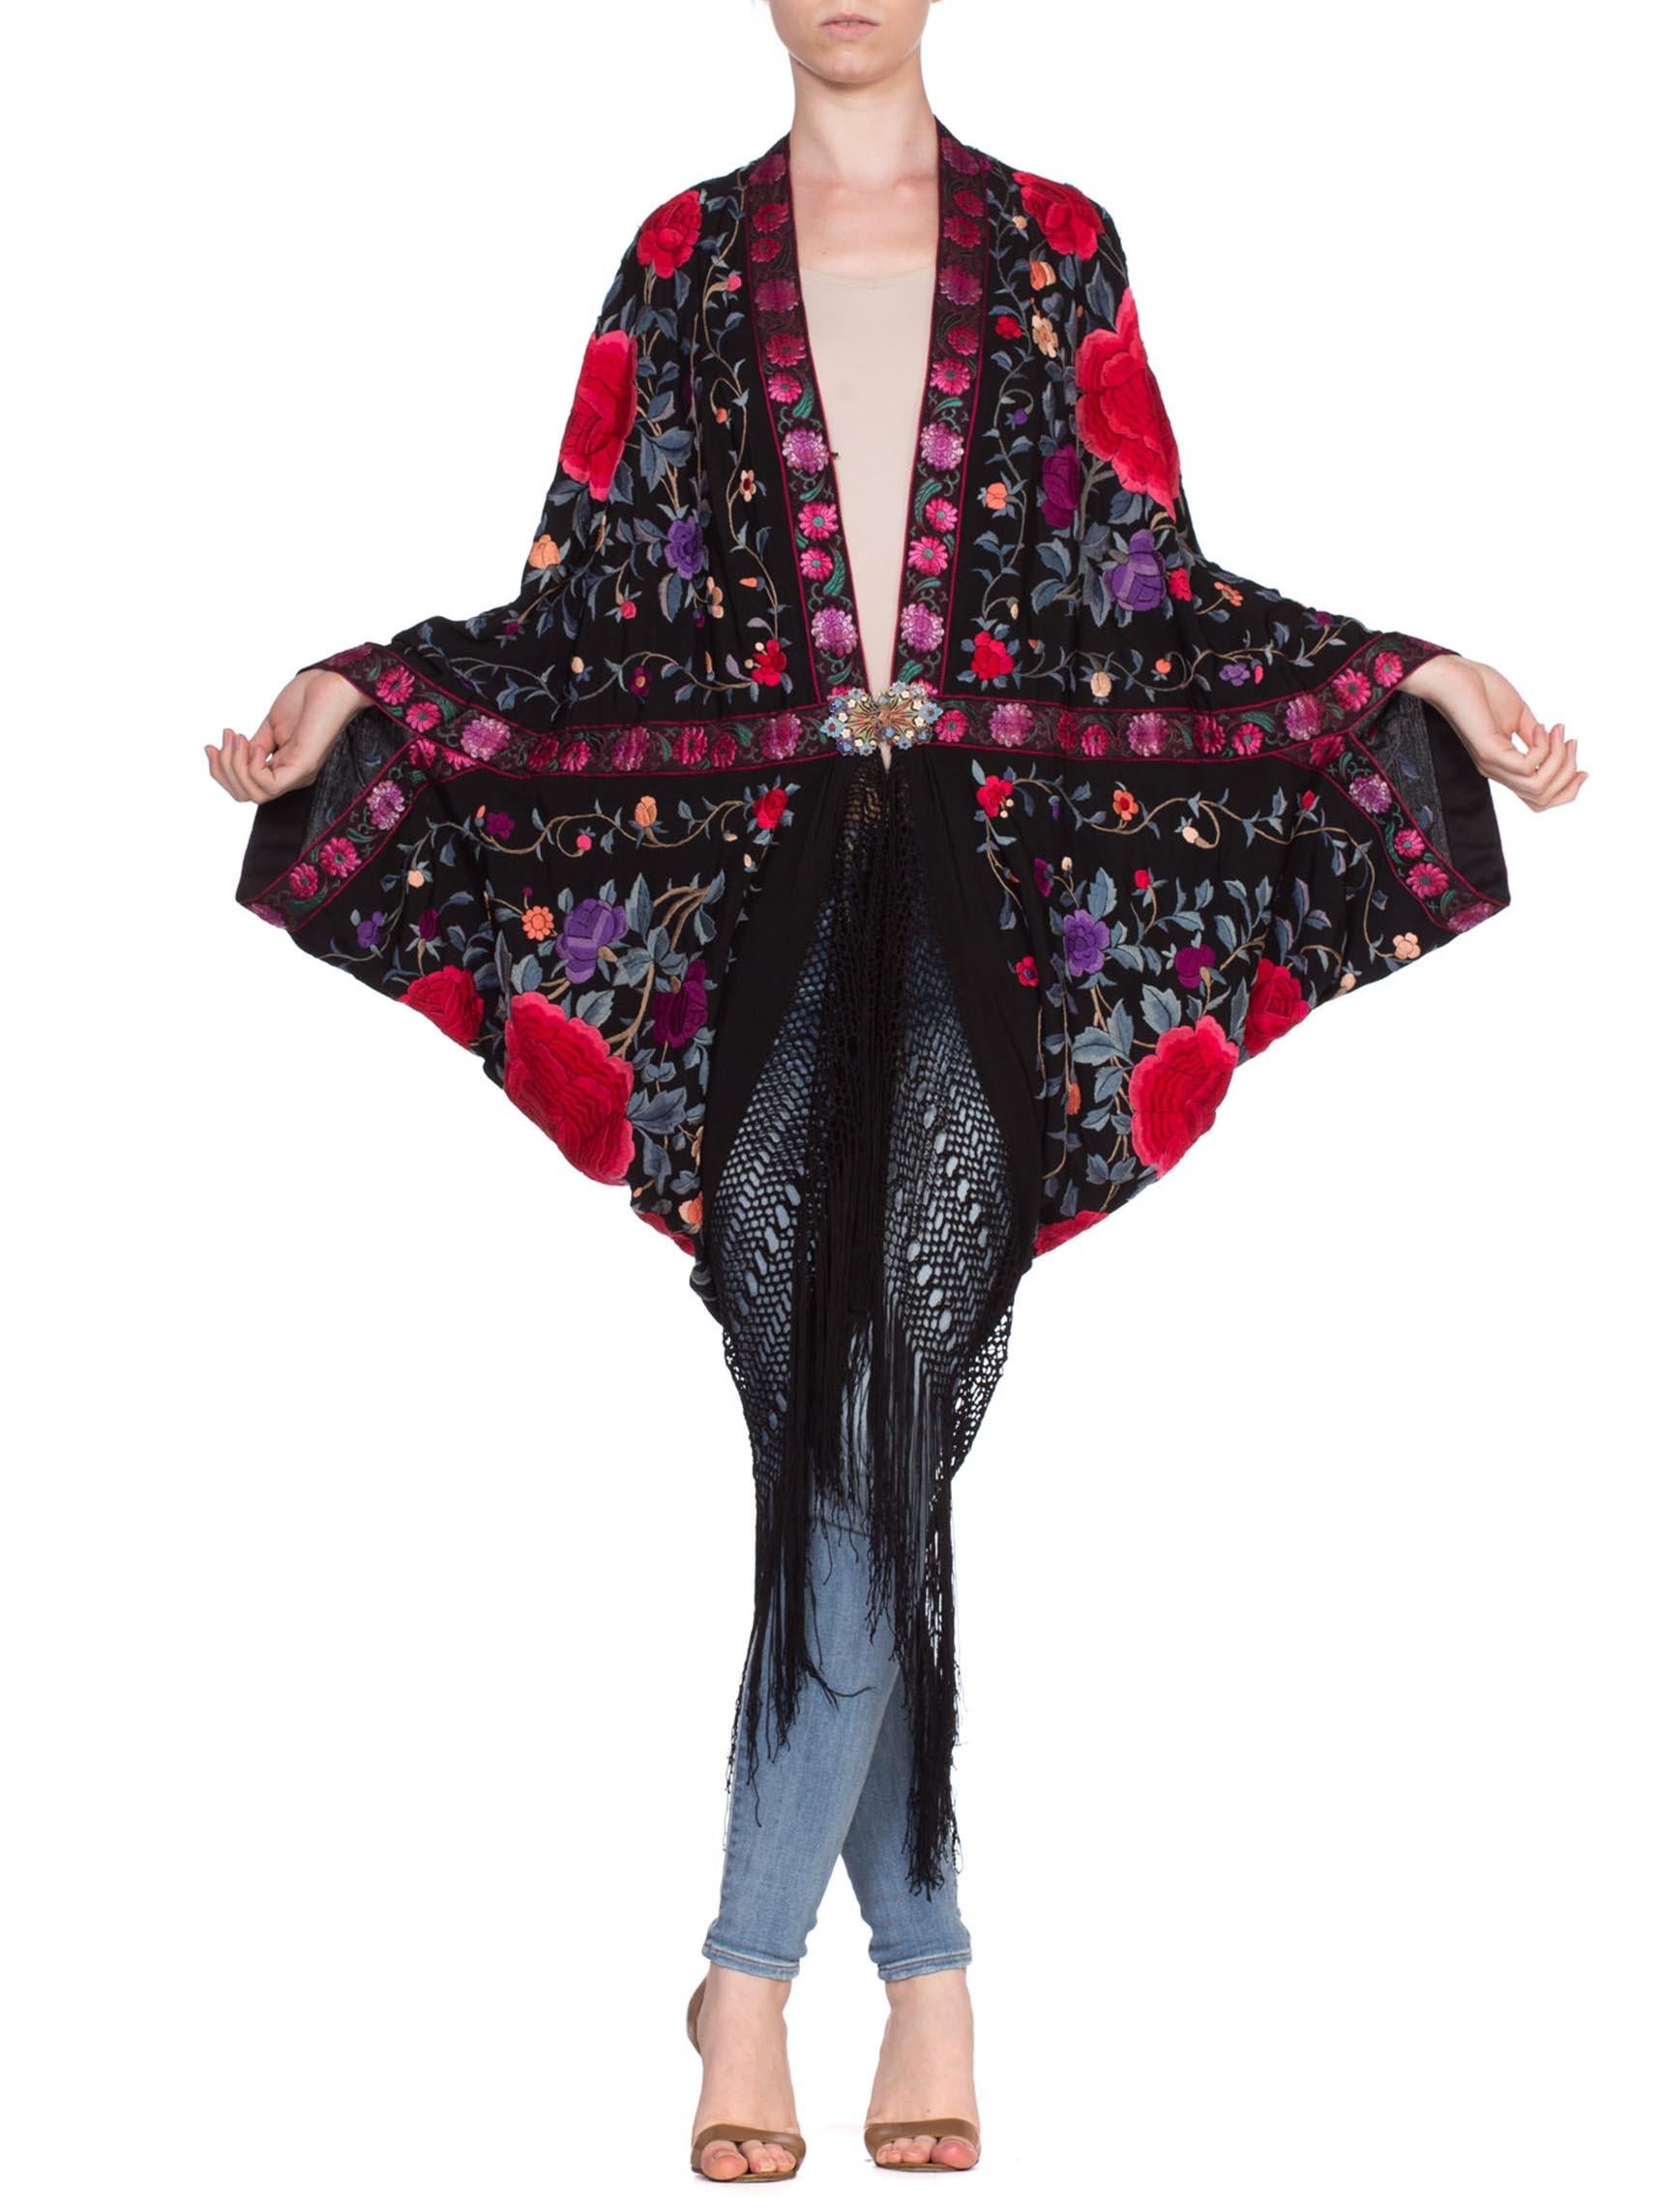 Morphew Lab Cocoon Made From 1920's Hand Embroidered Asian Silk With Fringe And An 1870's Clasp